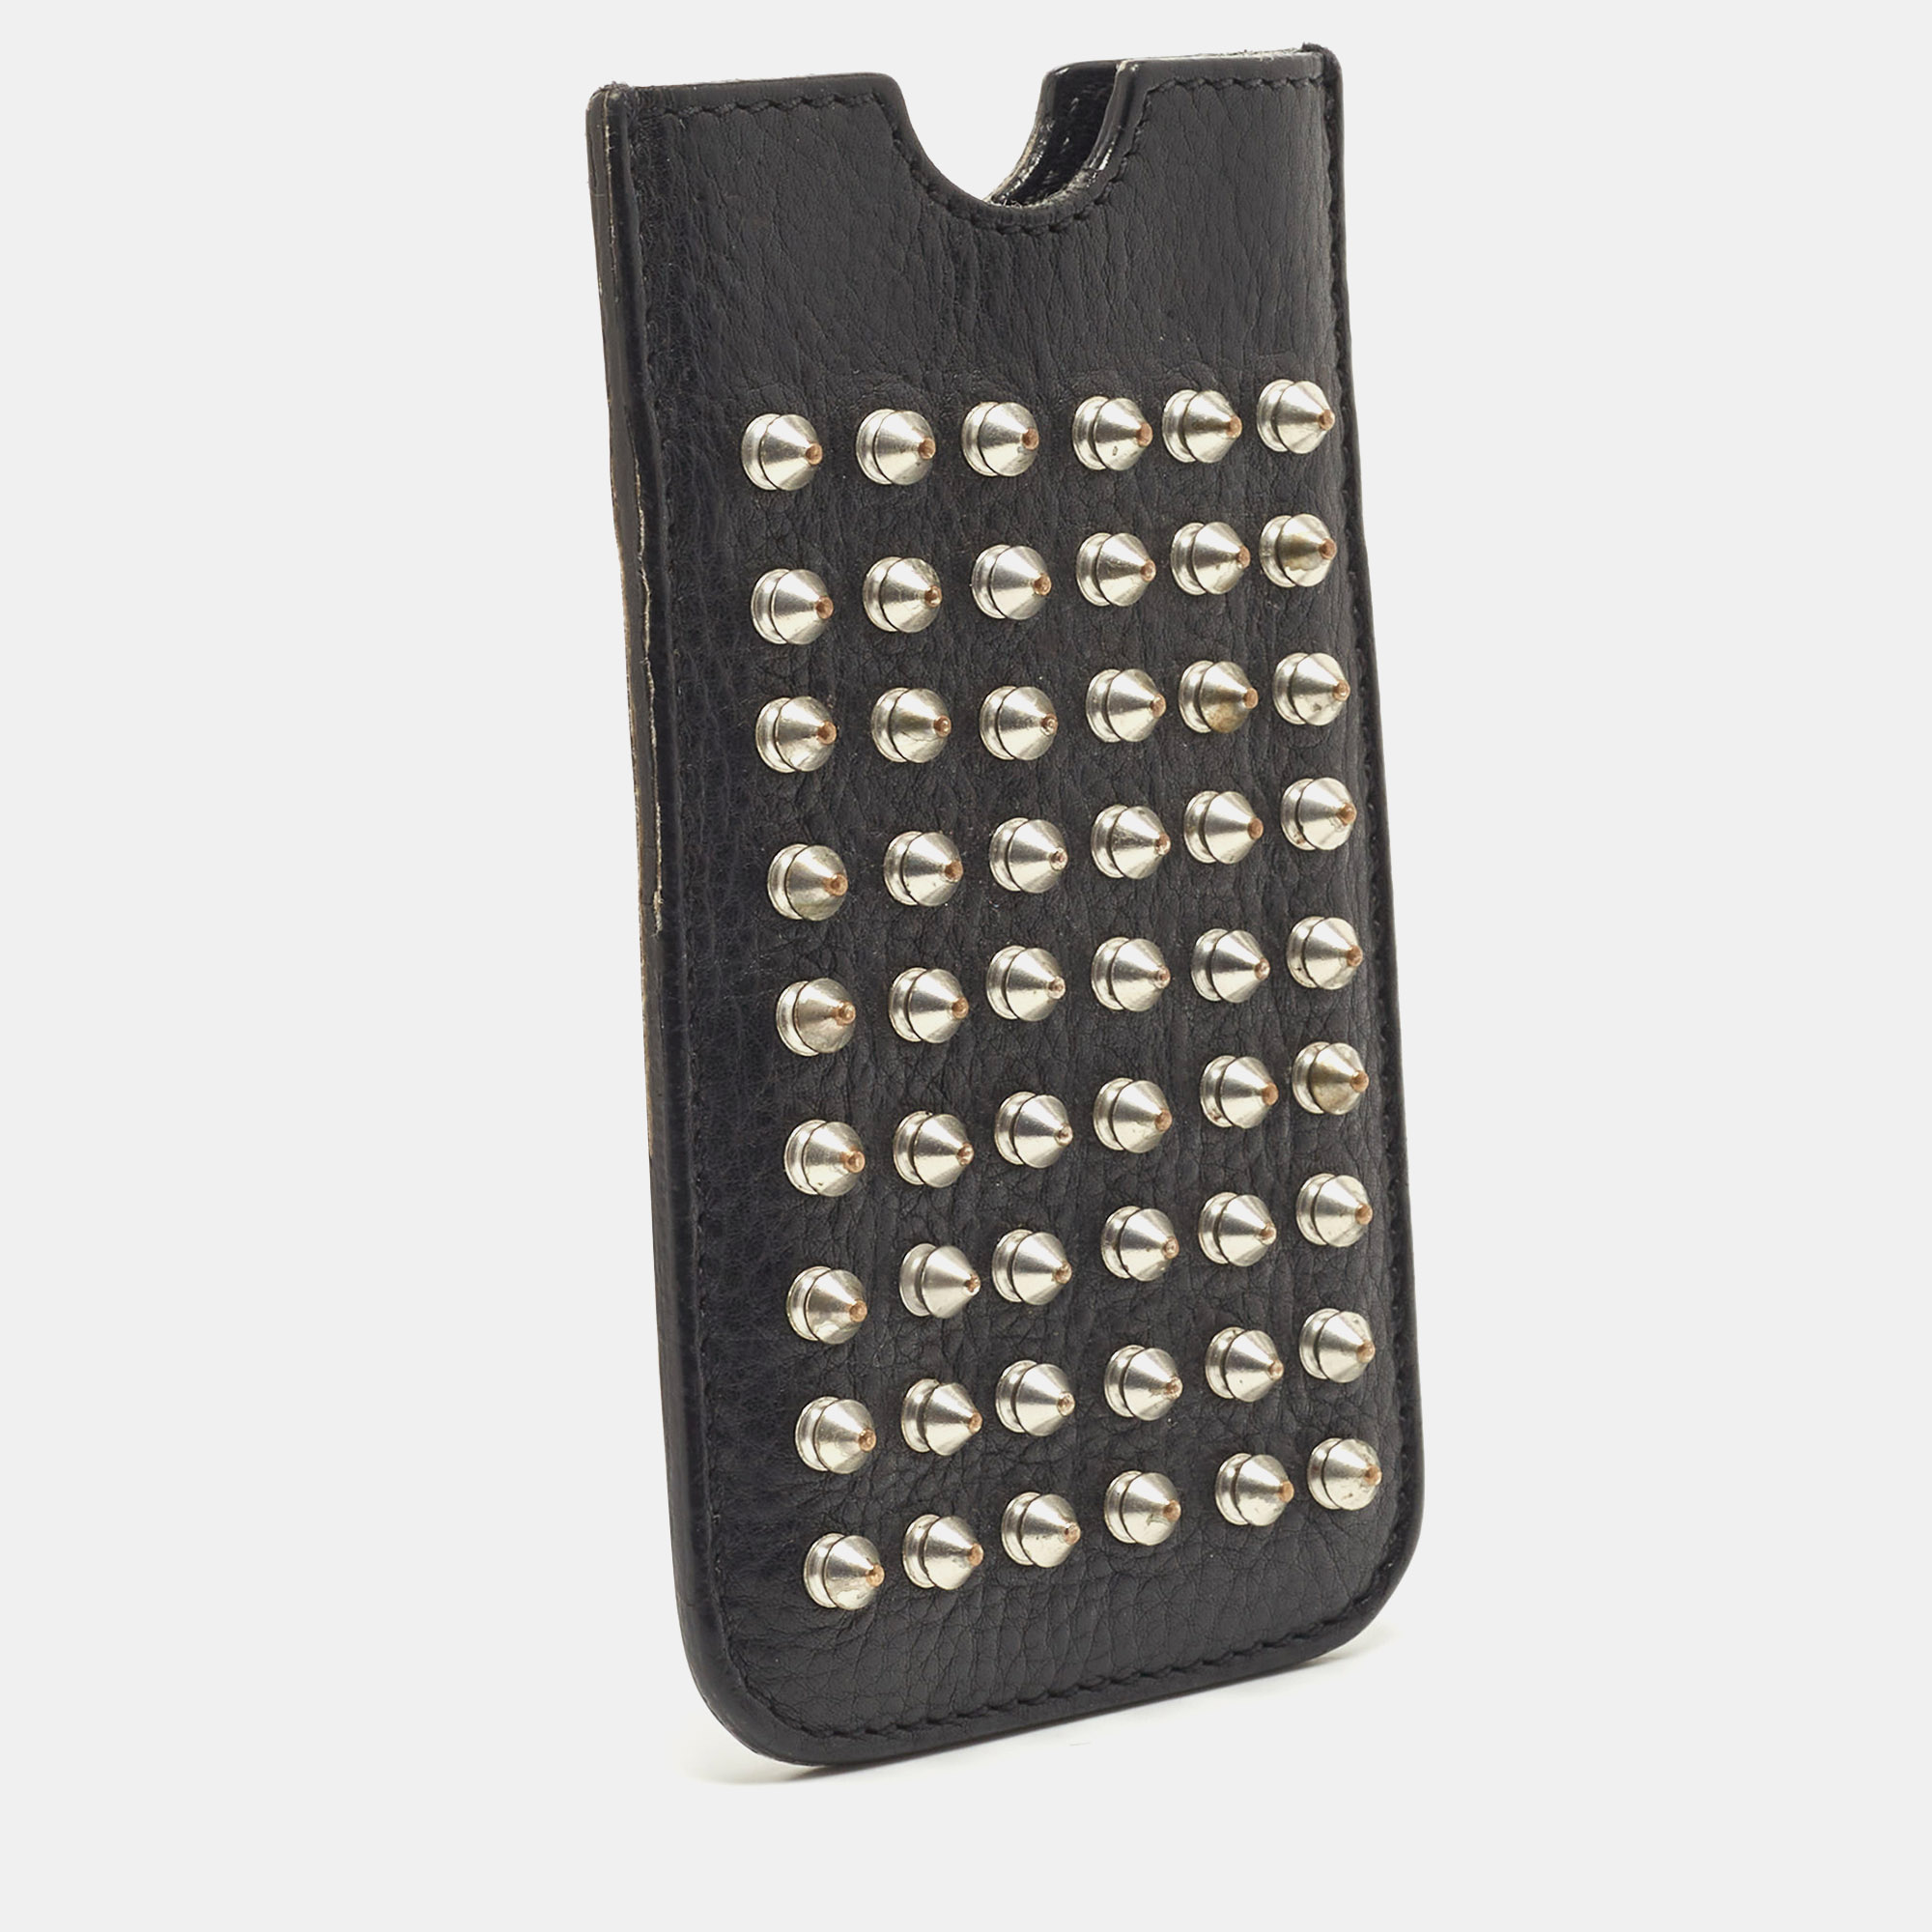 Burberry Black Spike Studded Leather Phone Pouch